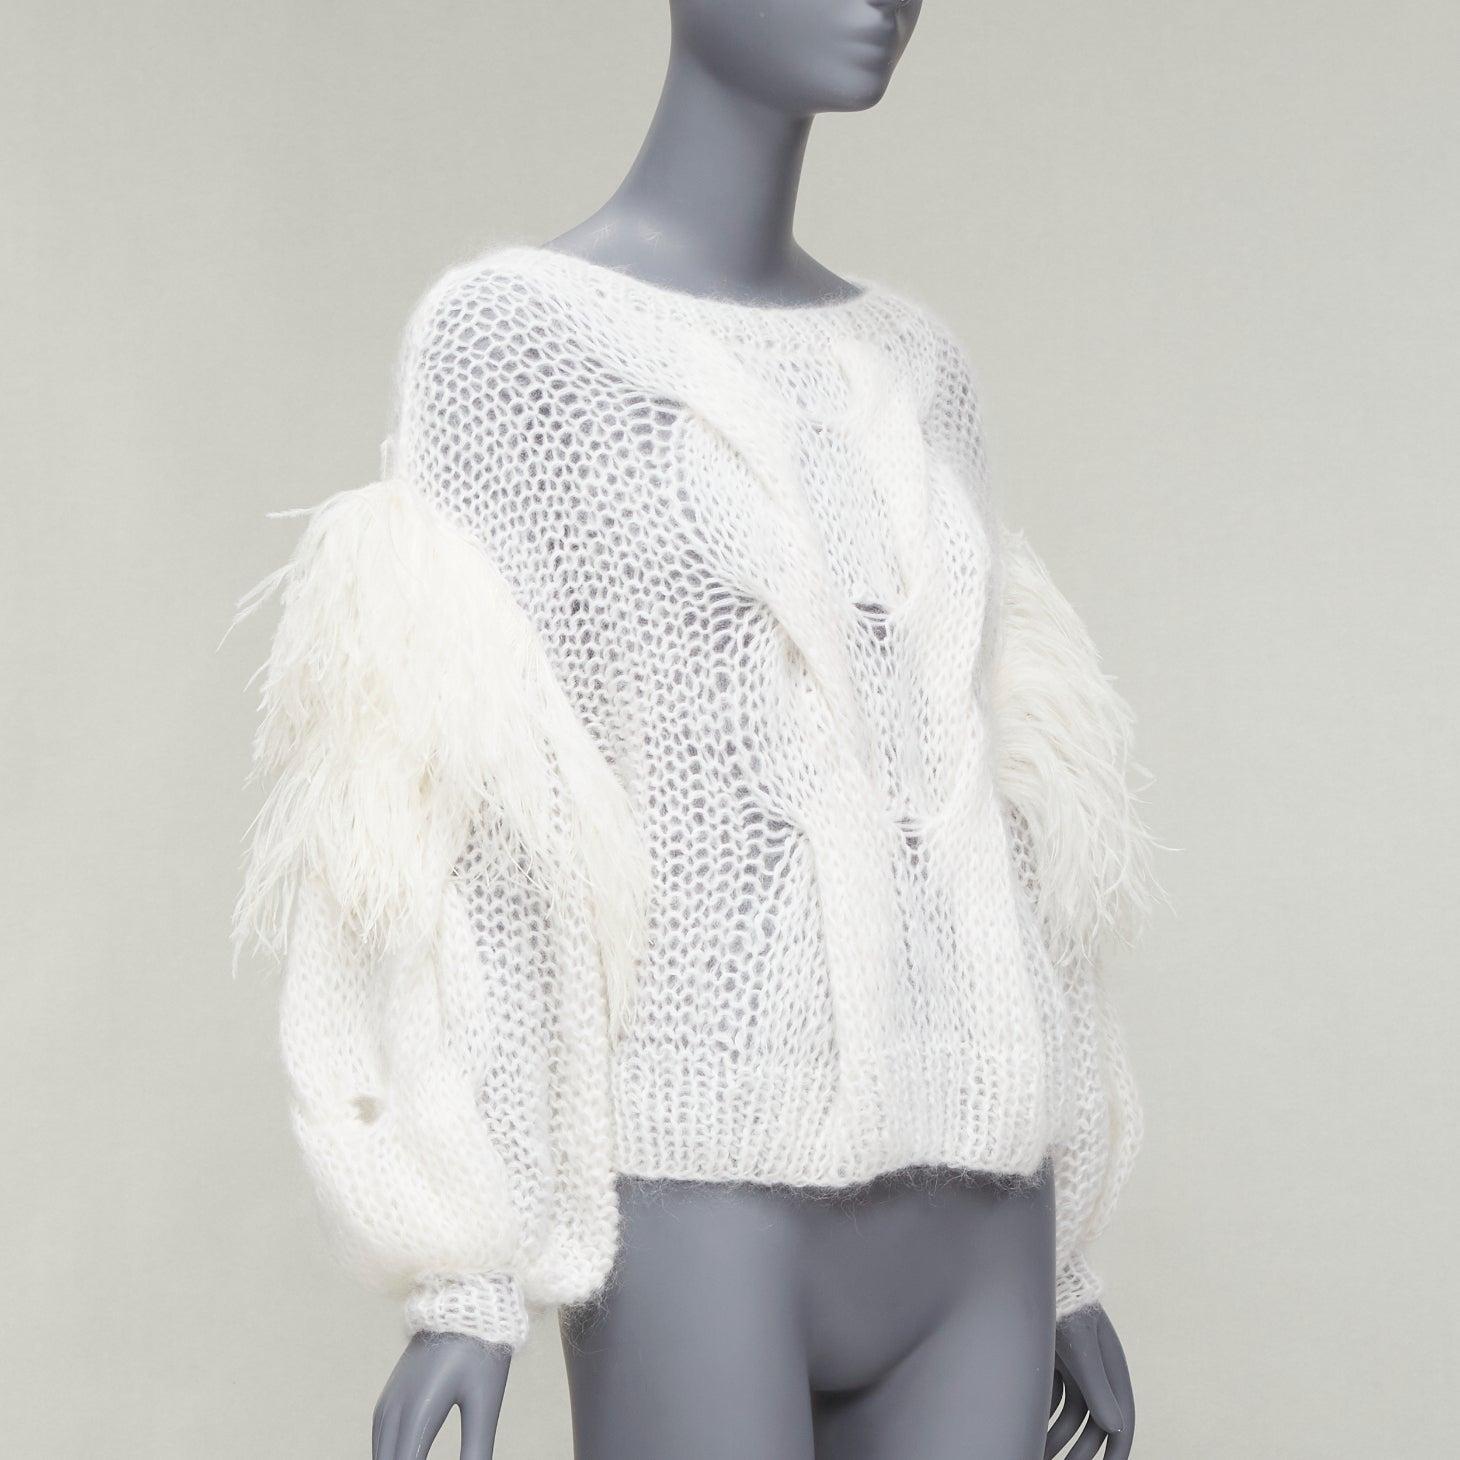 LOEWE white ostrich feather trim mohair loose cable knit jumper XS
Reference: AAWC/A00657
Brand: Loewe
Designer: JW Anderson
Model: 2022
Material: Mohair, Blend, Feather
Color: White
Pattern: Solid
Closure: Slip On
Extra Details: White mohair wool